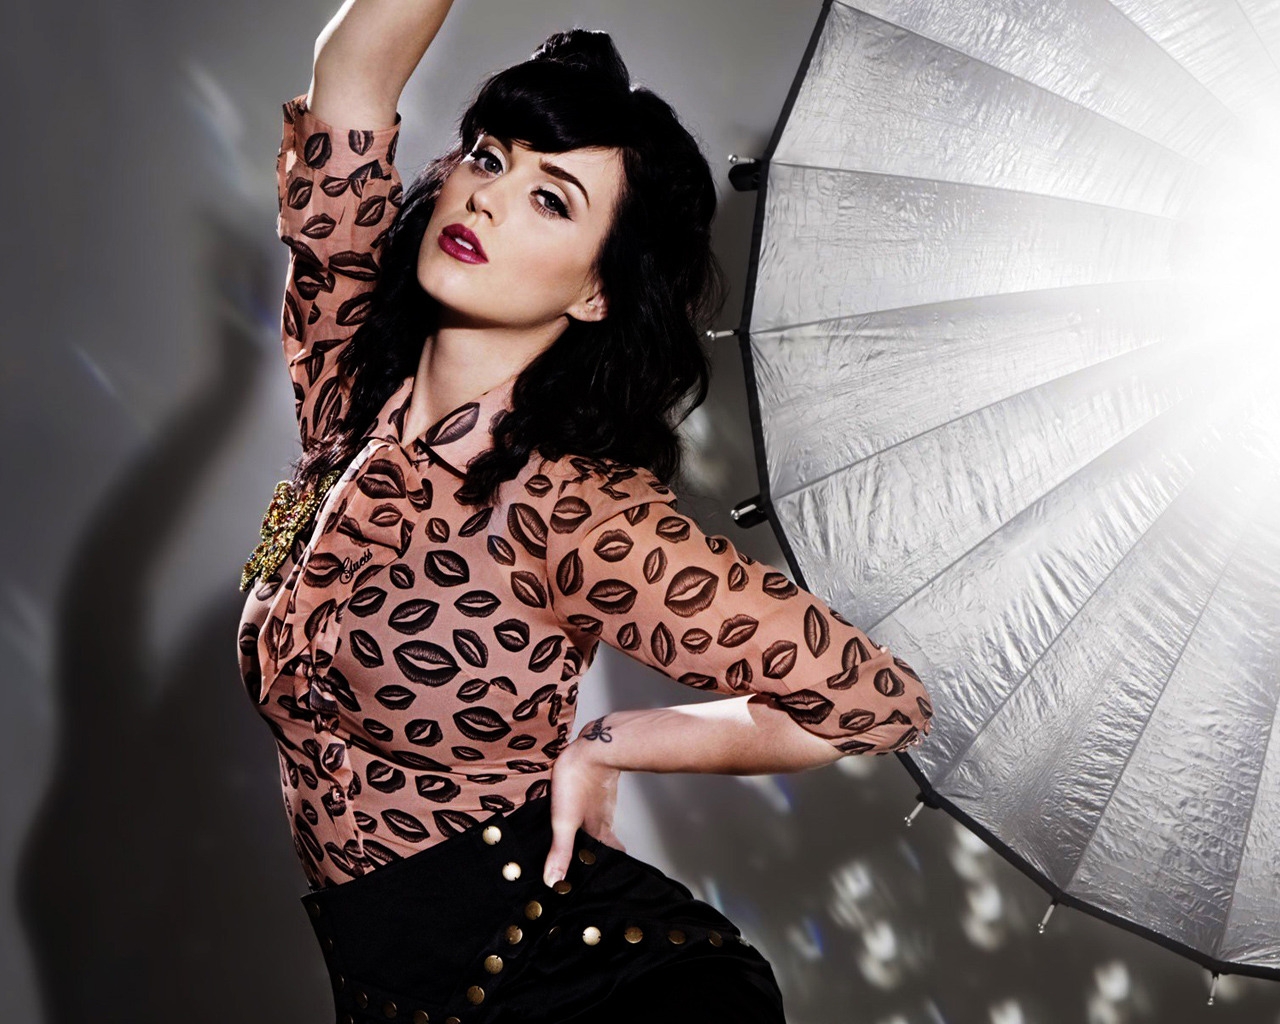 Katy Perry Photo Session for 1280 x 1024 resolution